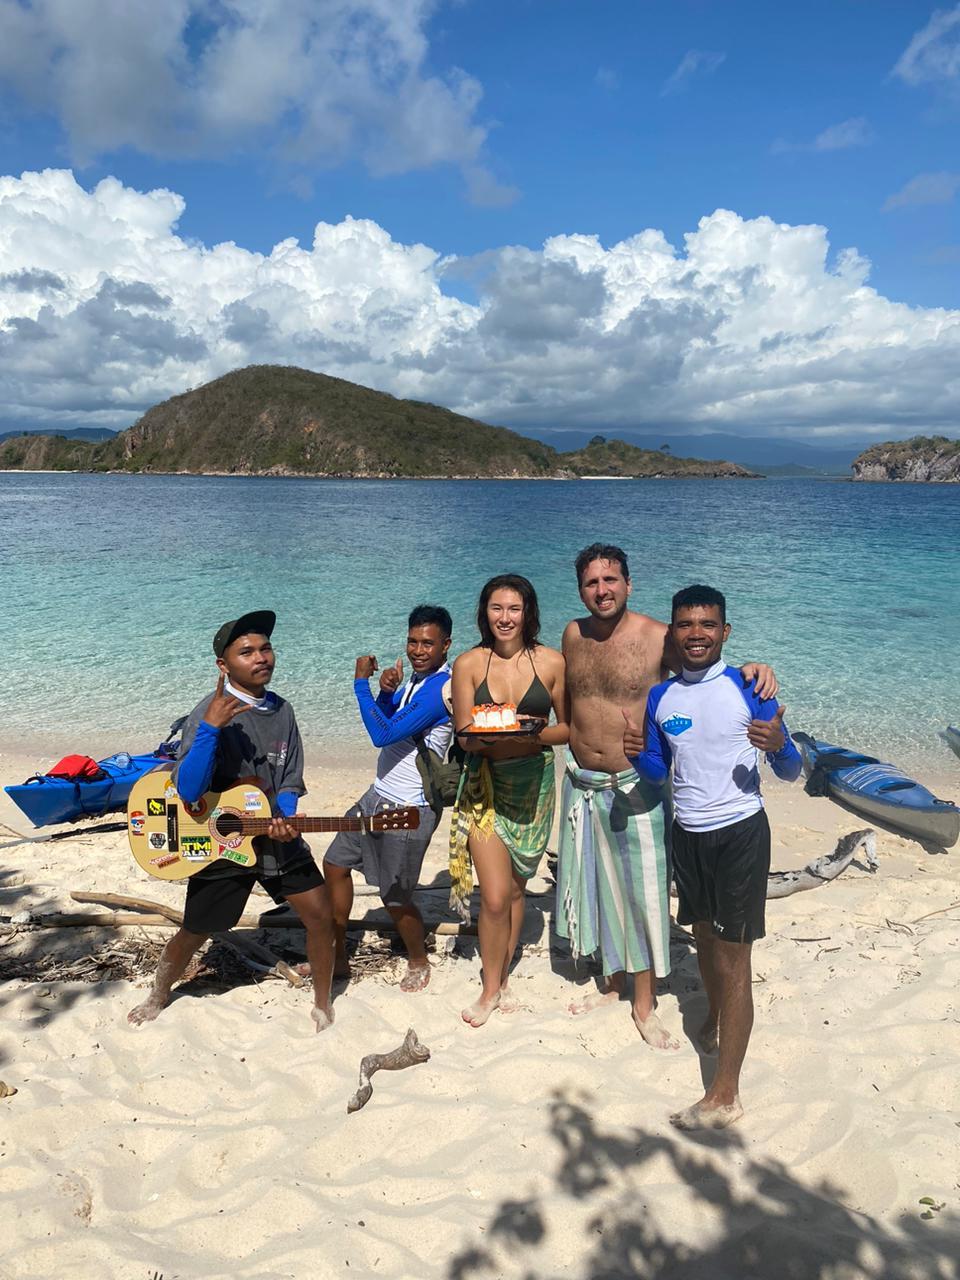 Birthday on the beach: Komodo Kayaking adventures - exploring UNESCO World Heritage park in serenity with local experts.